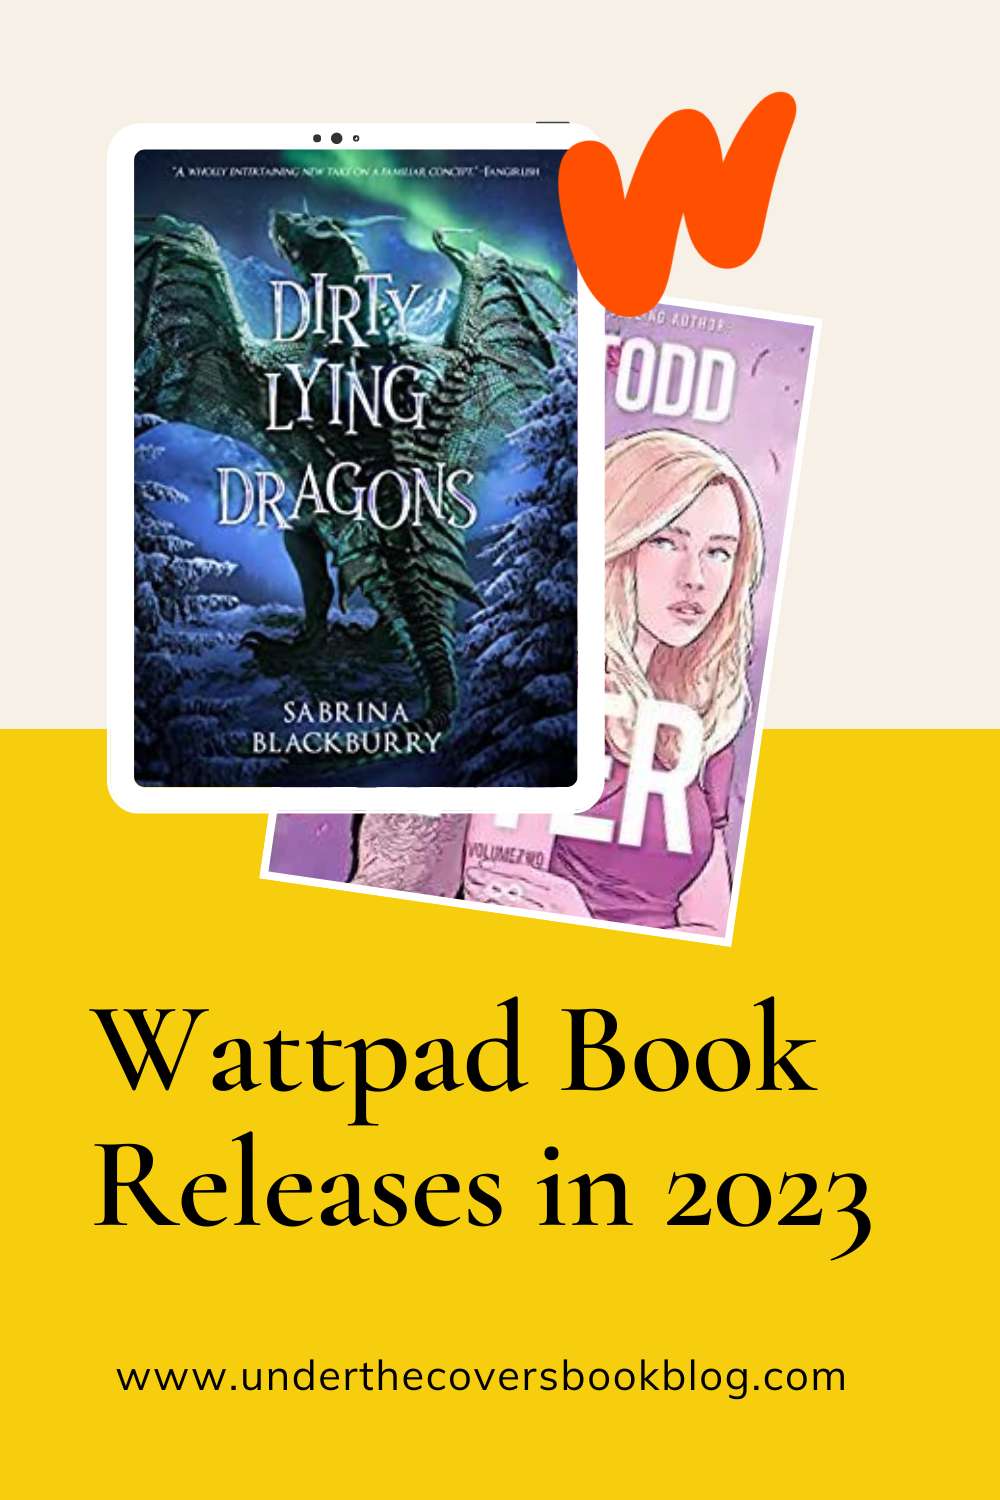 2023 Books Published from Wattpad